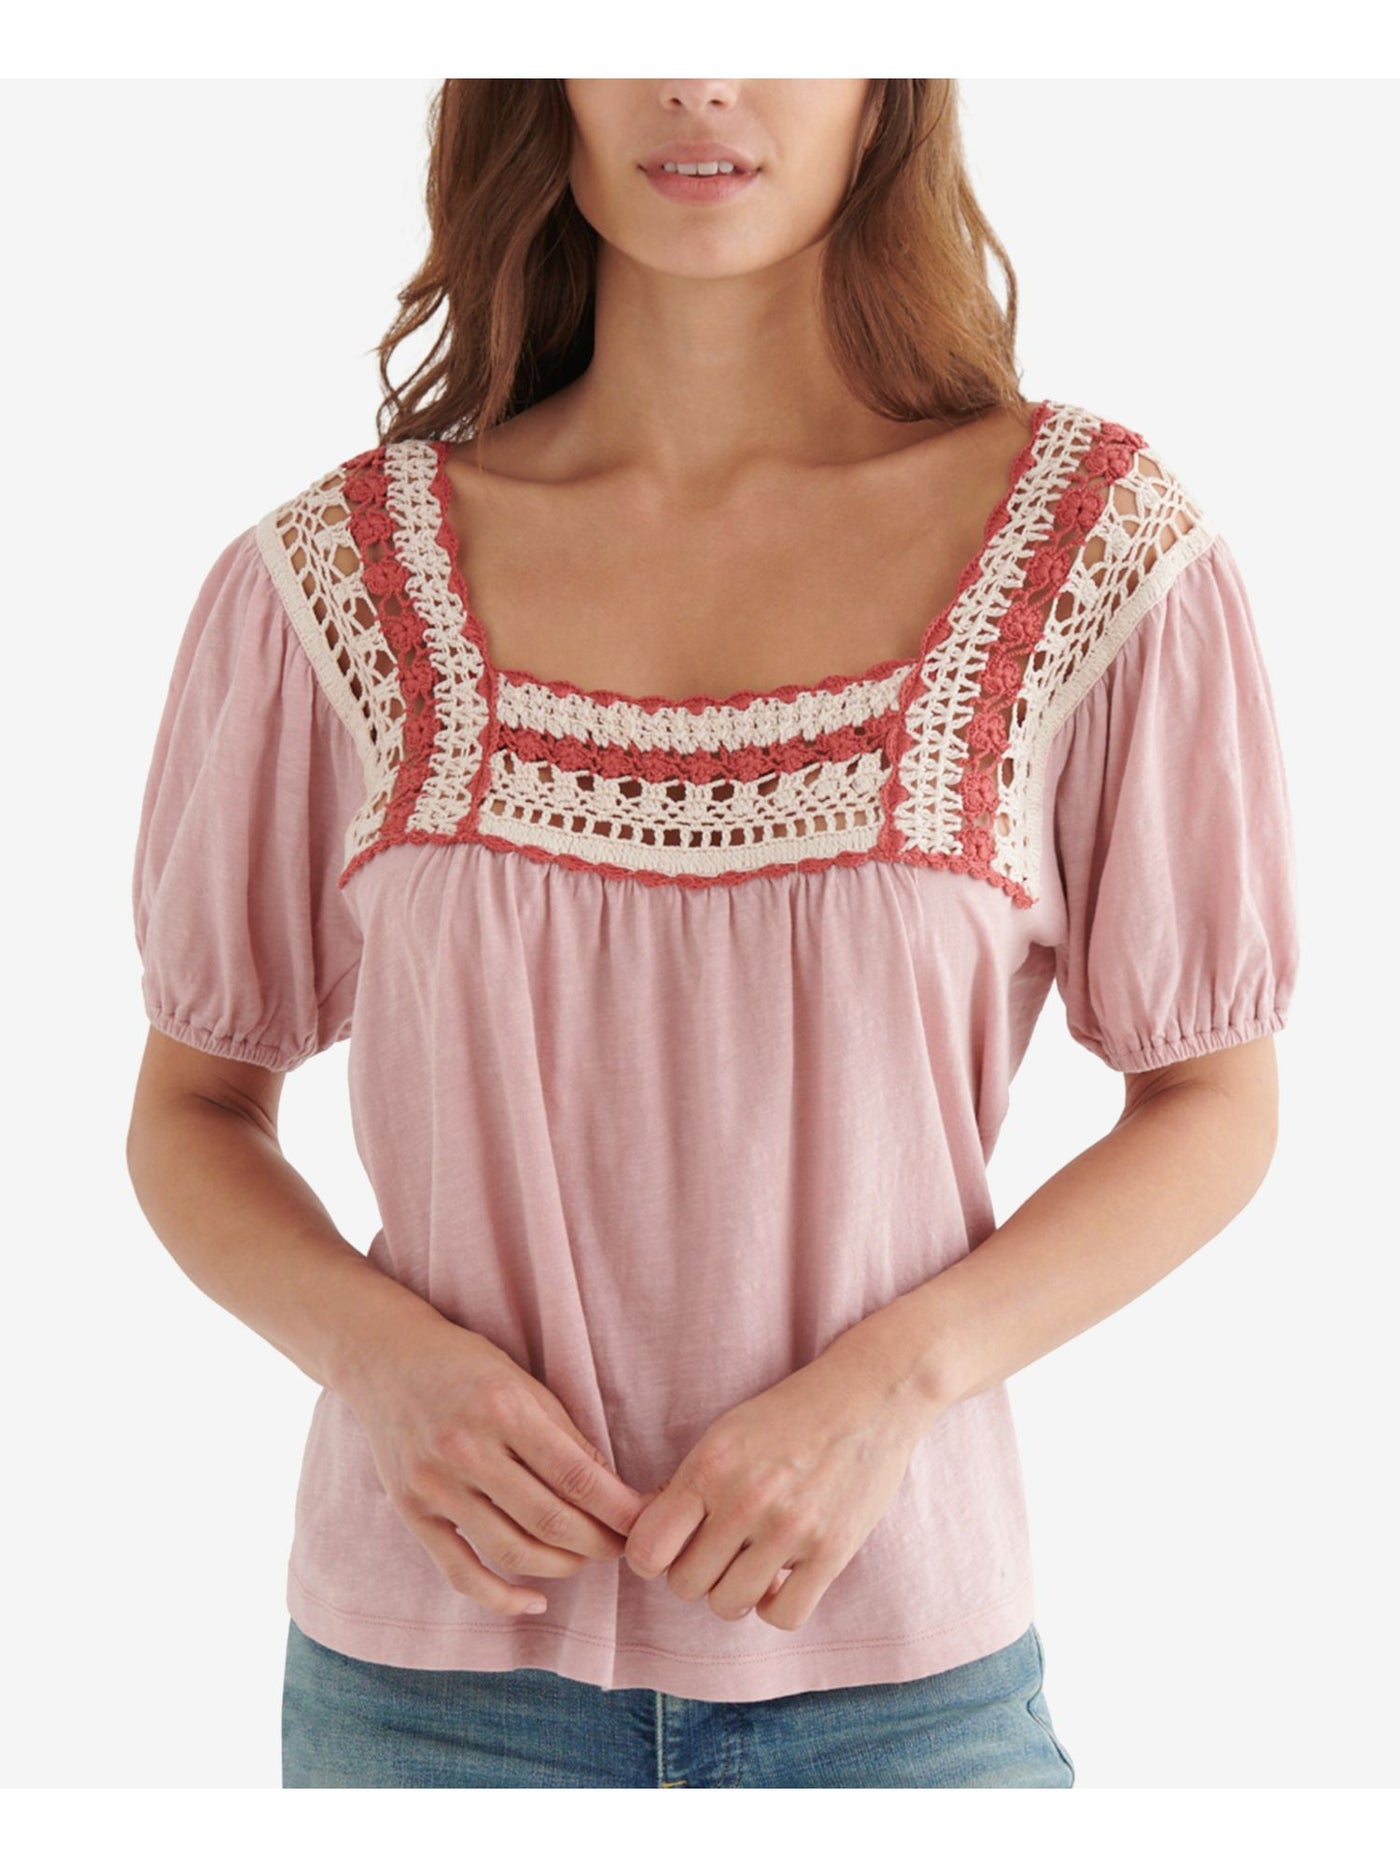 LUCKY BRAND Womens Pink Short Sleeve Square Neck Top S